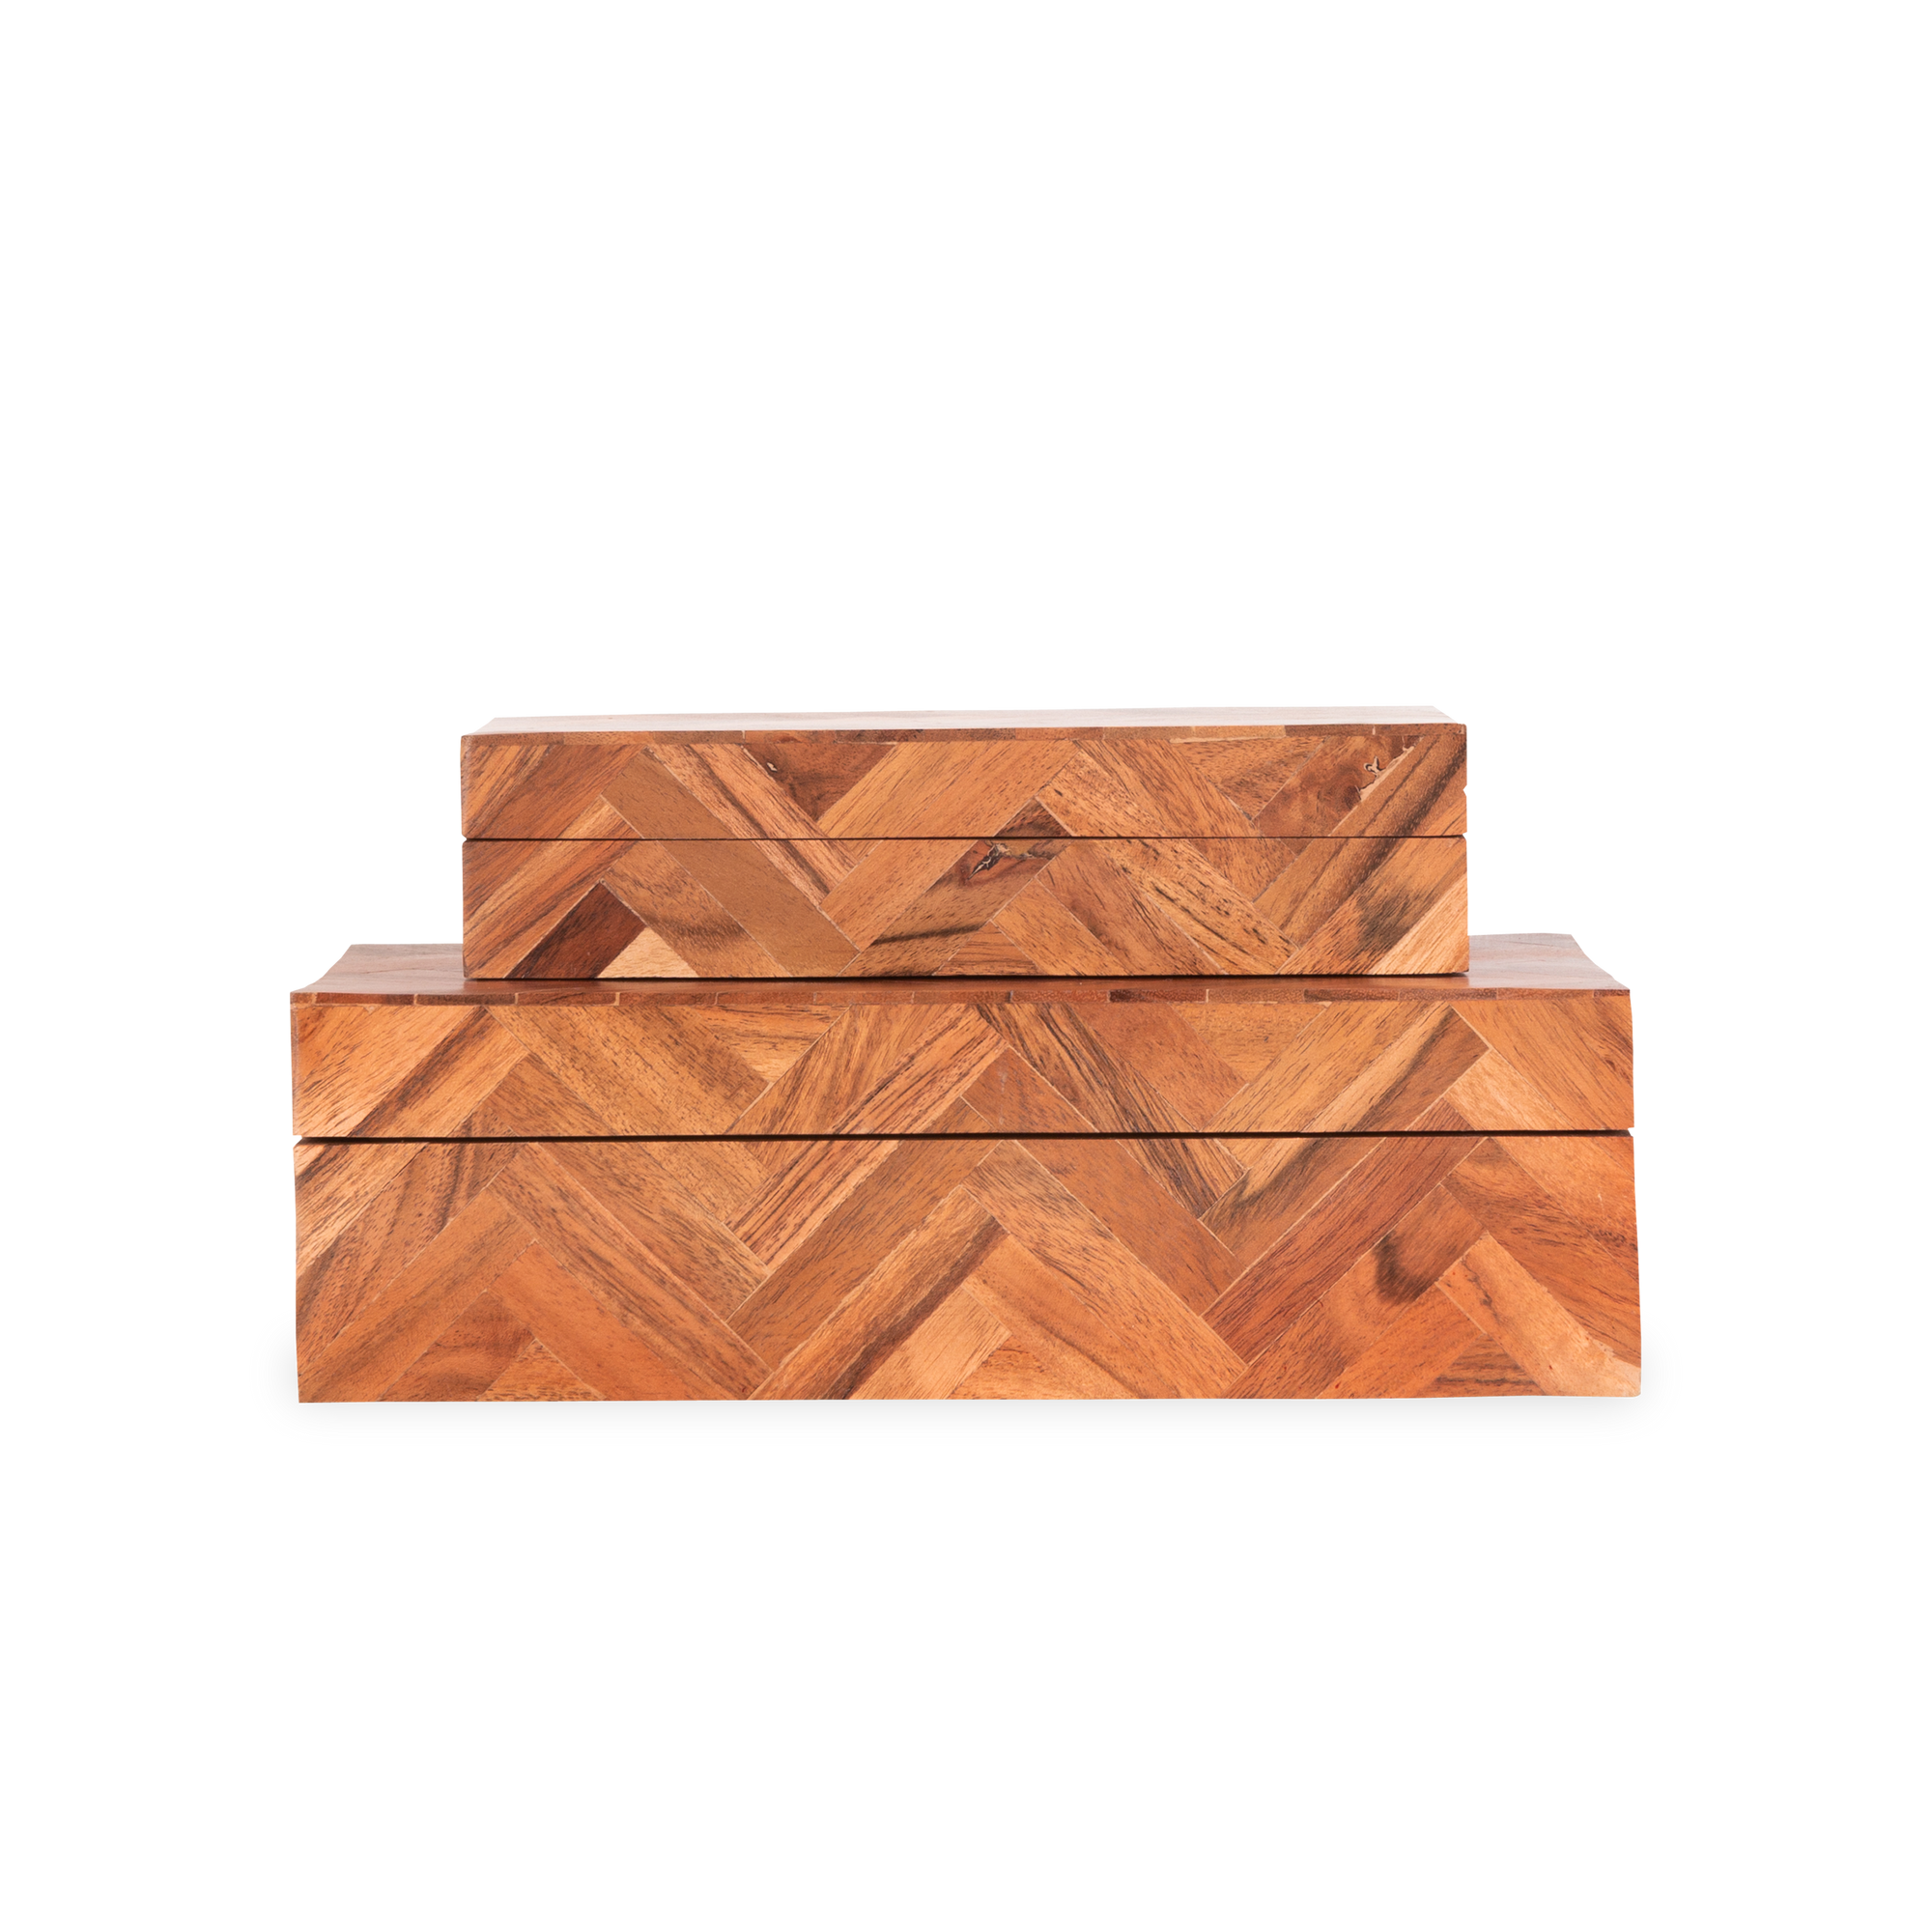 Sophisticated with a luxurious design and finish, the Herringbone Box Set includes a large and a small decorative box that is made of solid, high-quality wood with surface treatmen